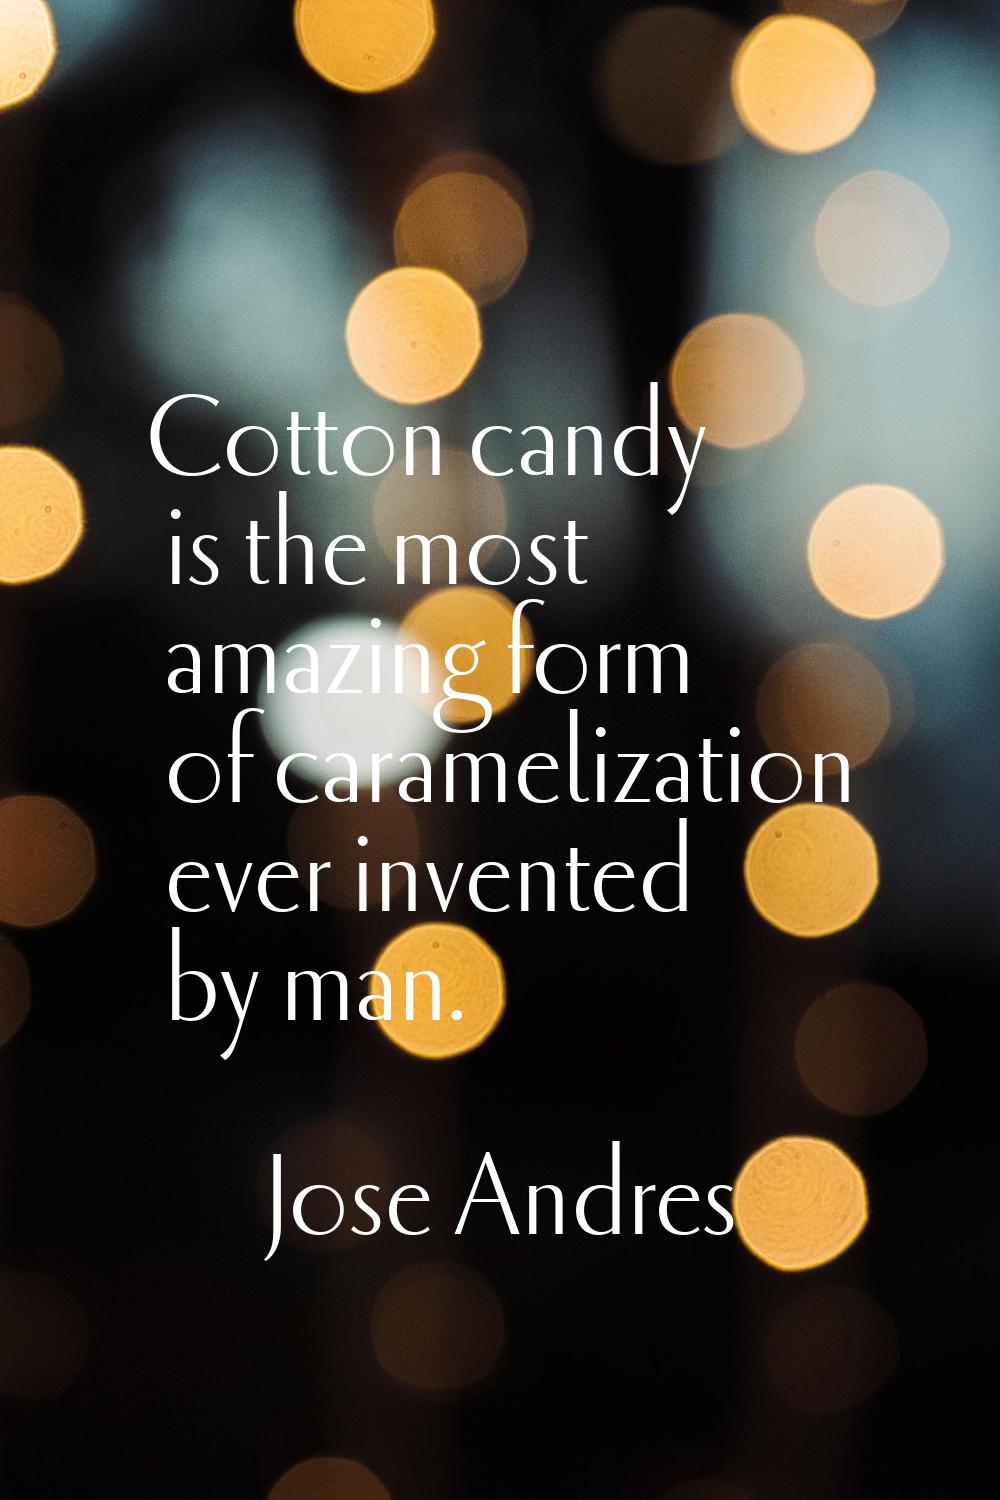 Cotton candy is the most amazing form of caramelization ever invented by man.